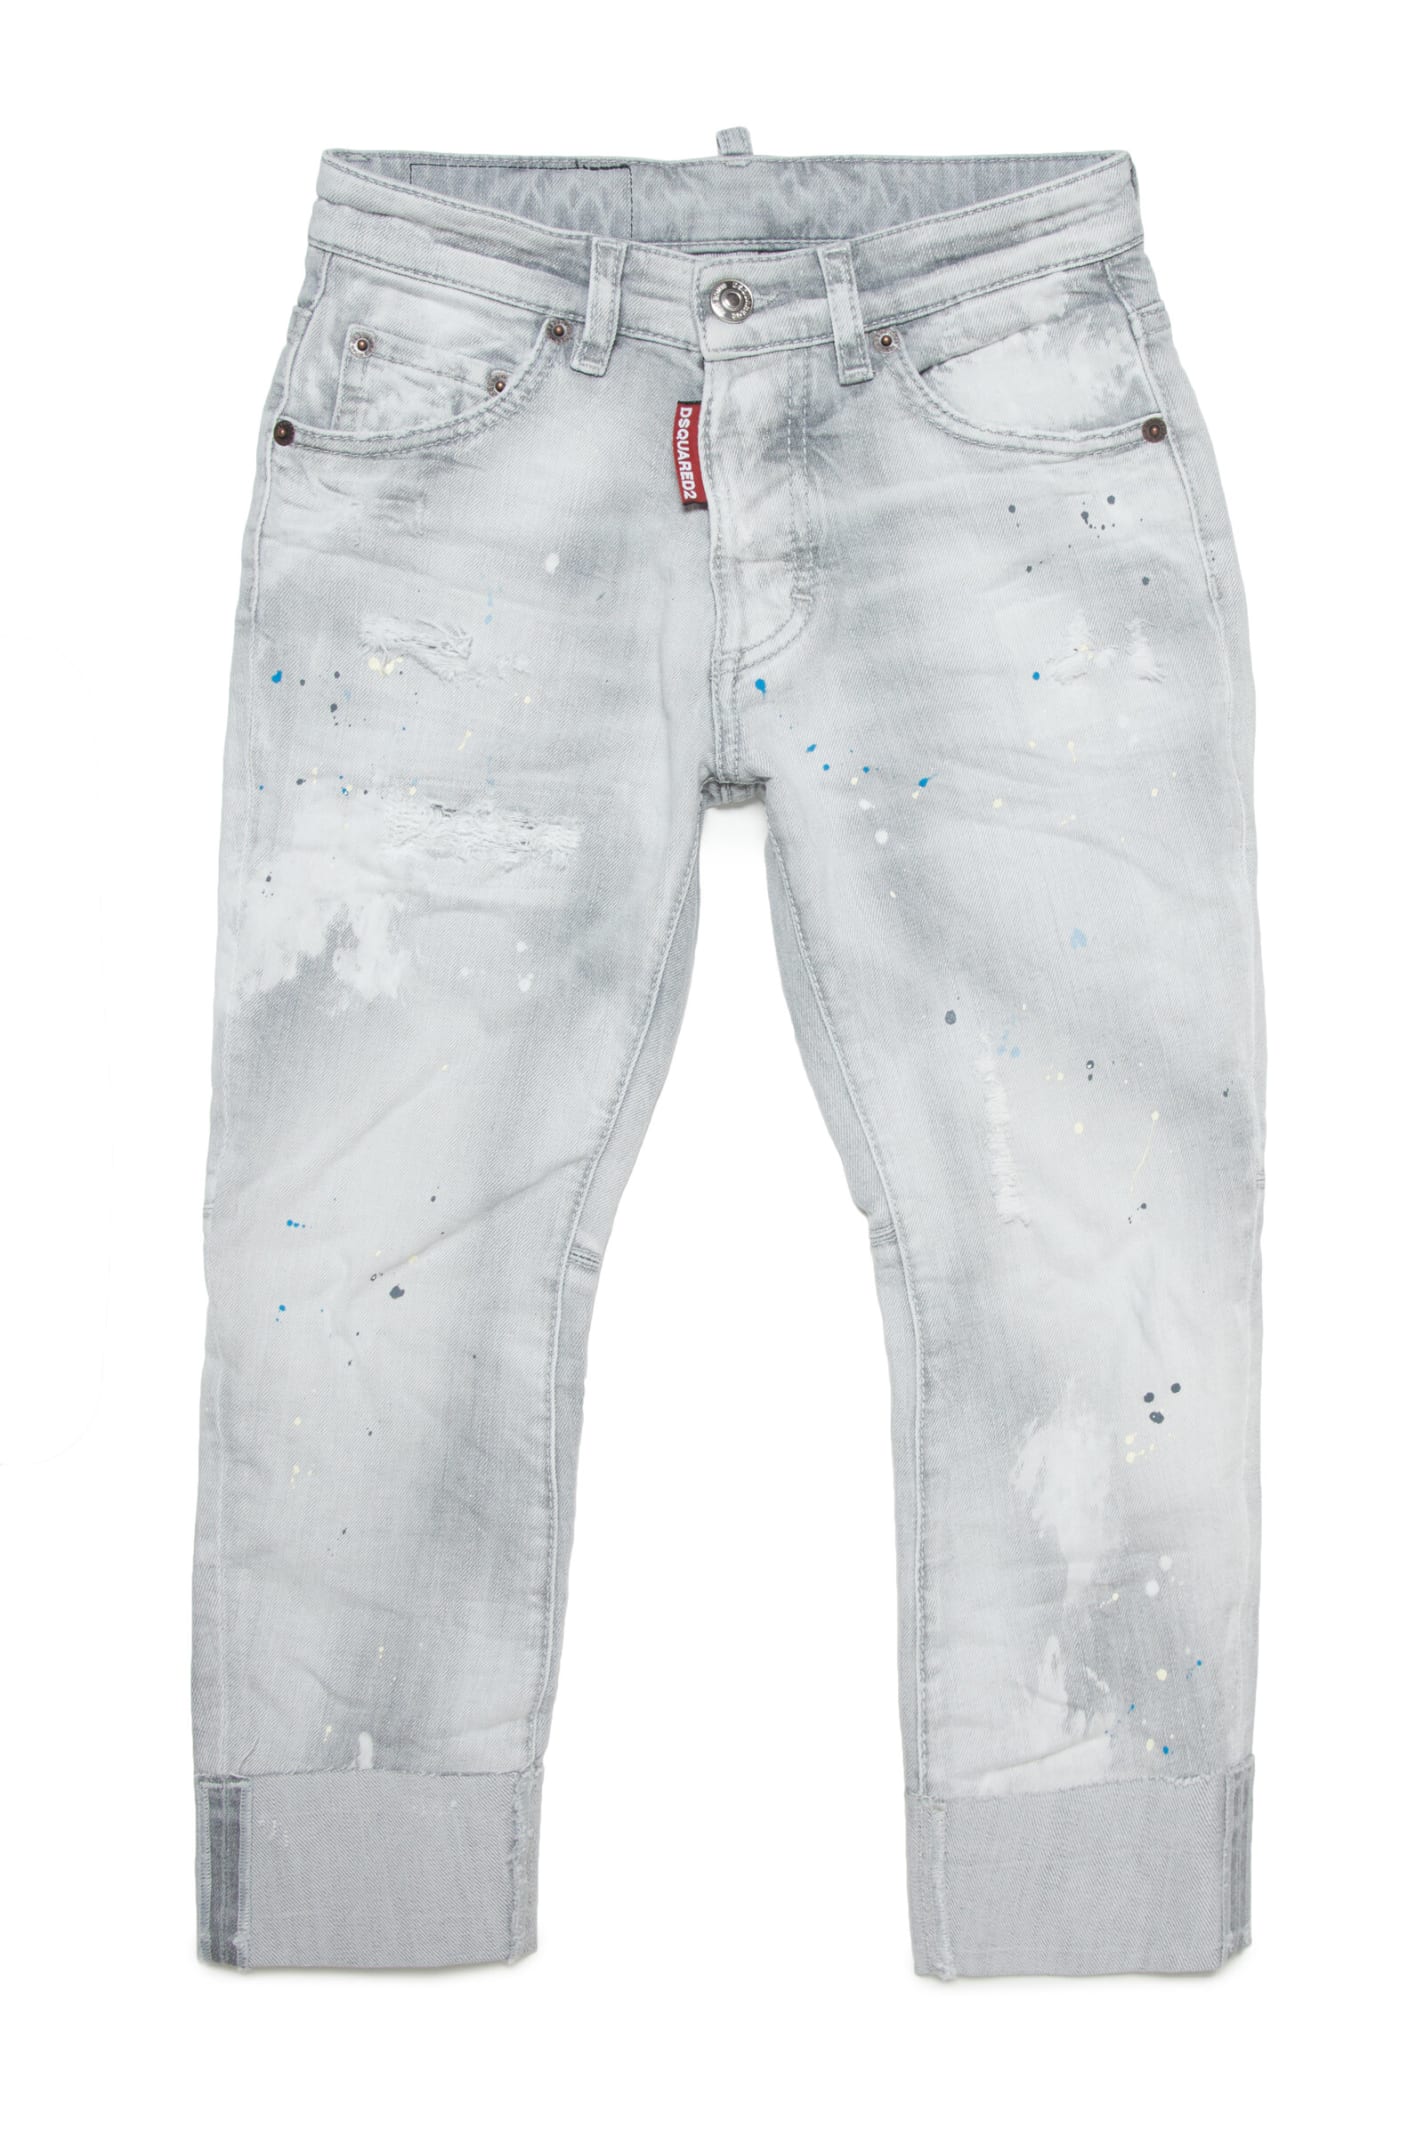 DSQUARED2 D2P384M SAILOR JEAN TROUSERS DSQUARED JEANS COMBAT STRAIGHT GRAY WASHED OUT WITH TEARS AND STAINS